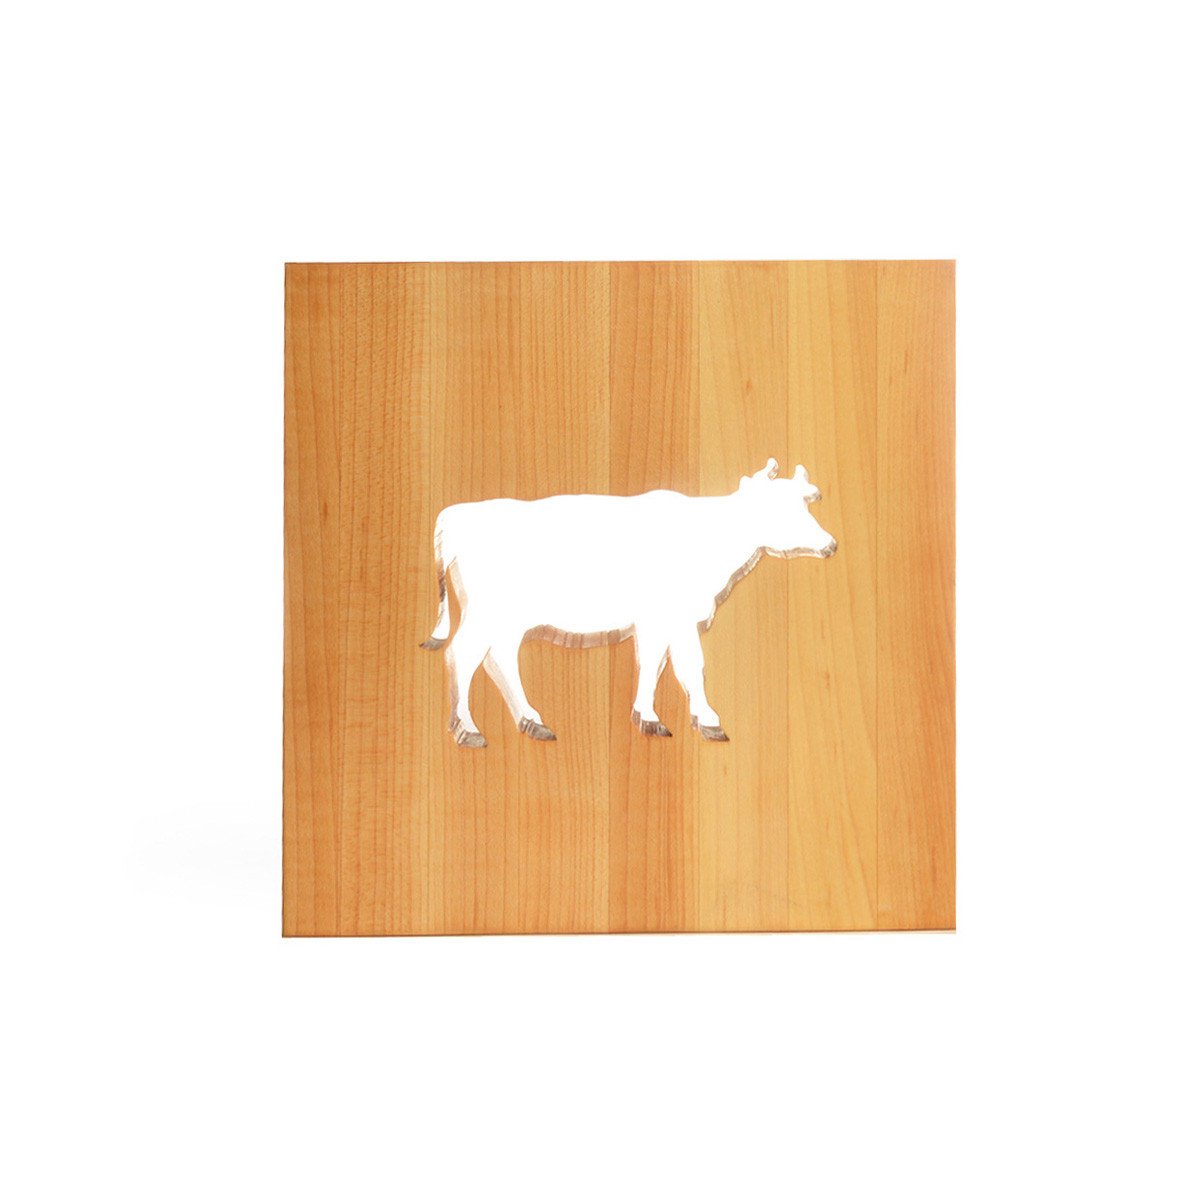 TRIVET - CALYPSO THE COW - wooden trivets - Words with Boards
 - 1